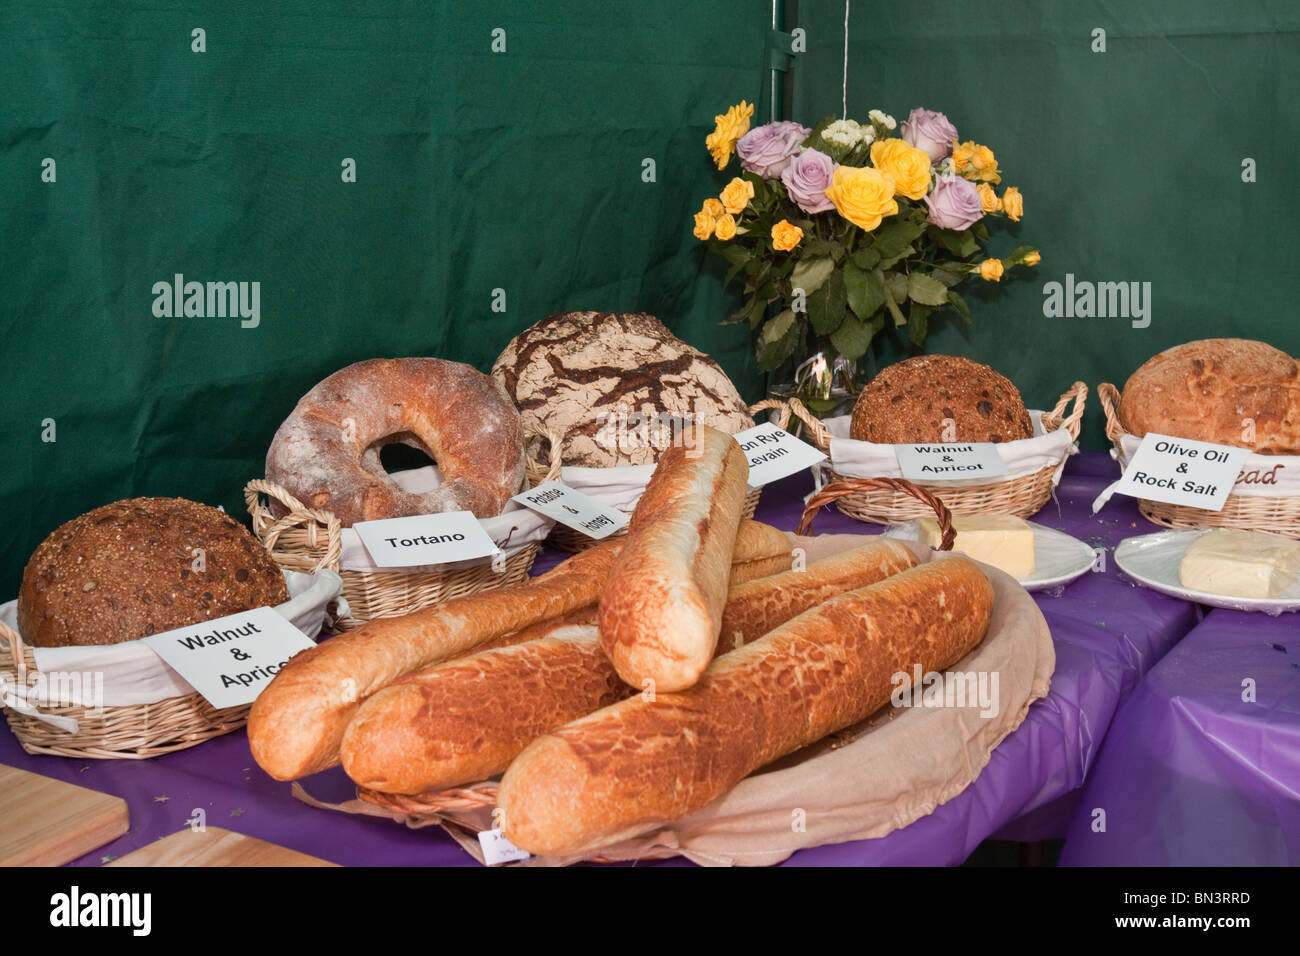 Display of different breads at a party Stock Photo